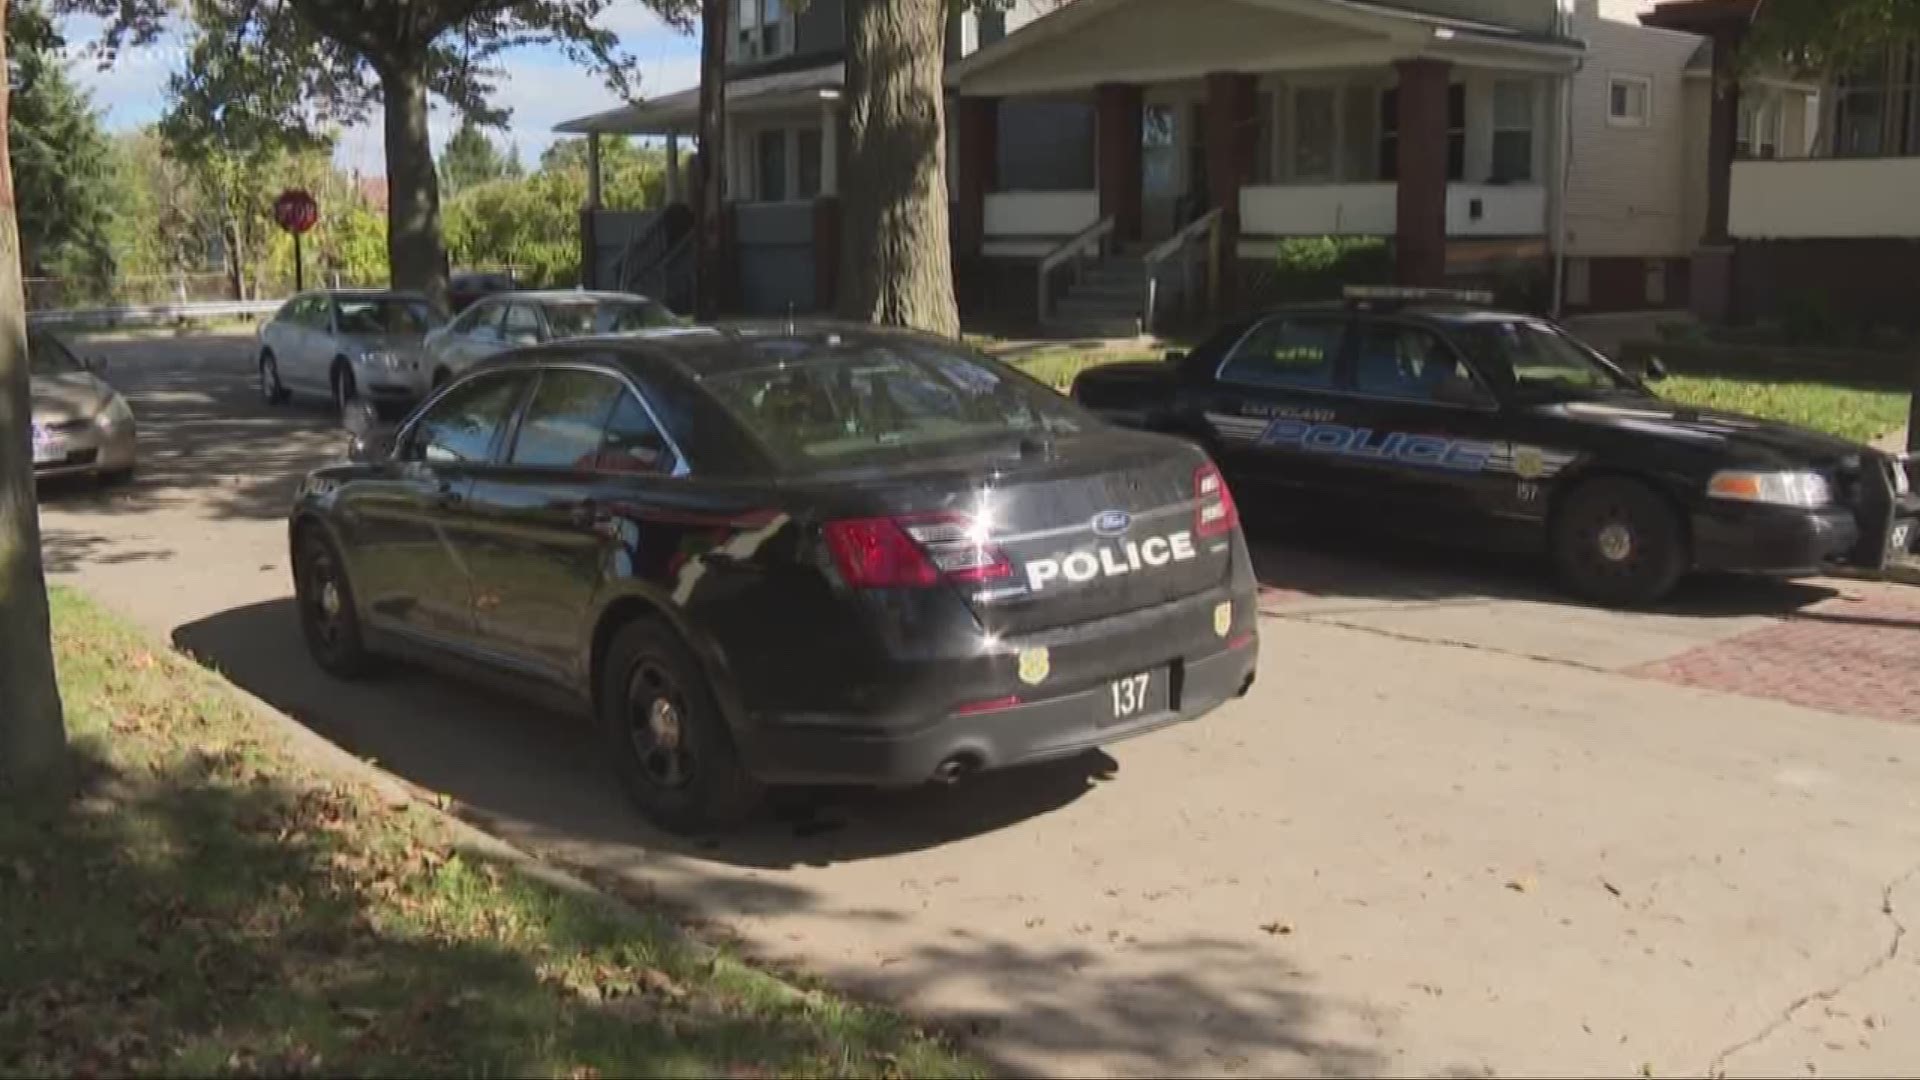 Police find two dead bodies in house on Cleveland's west side in possible murder-suicide